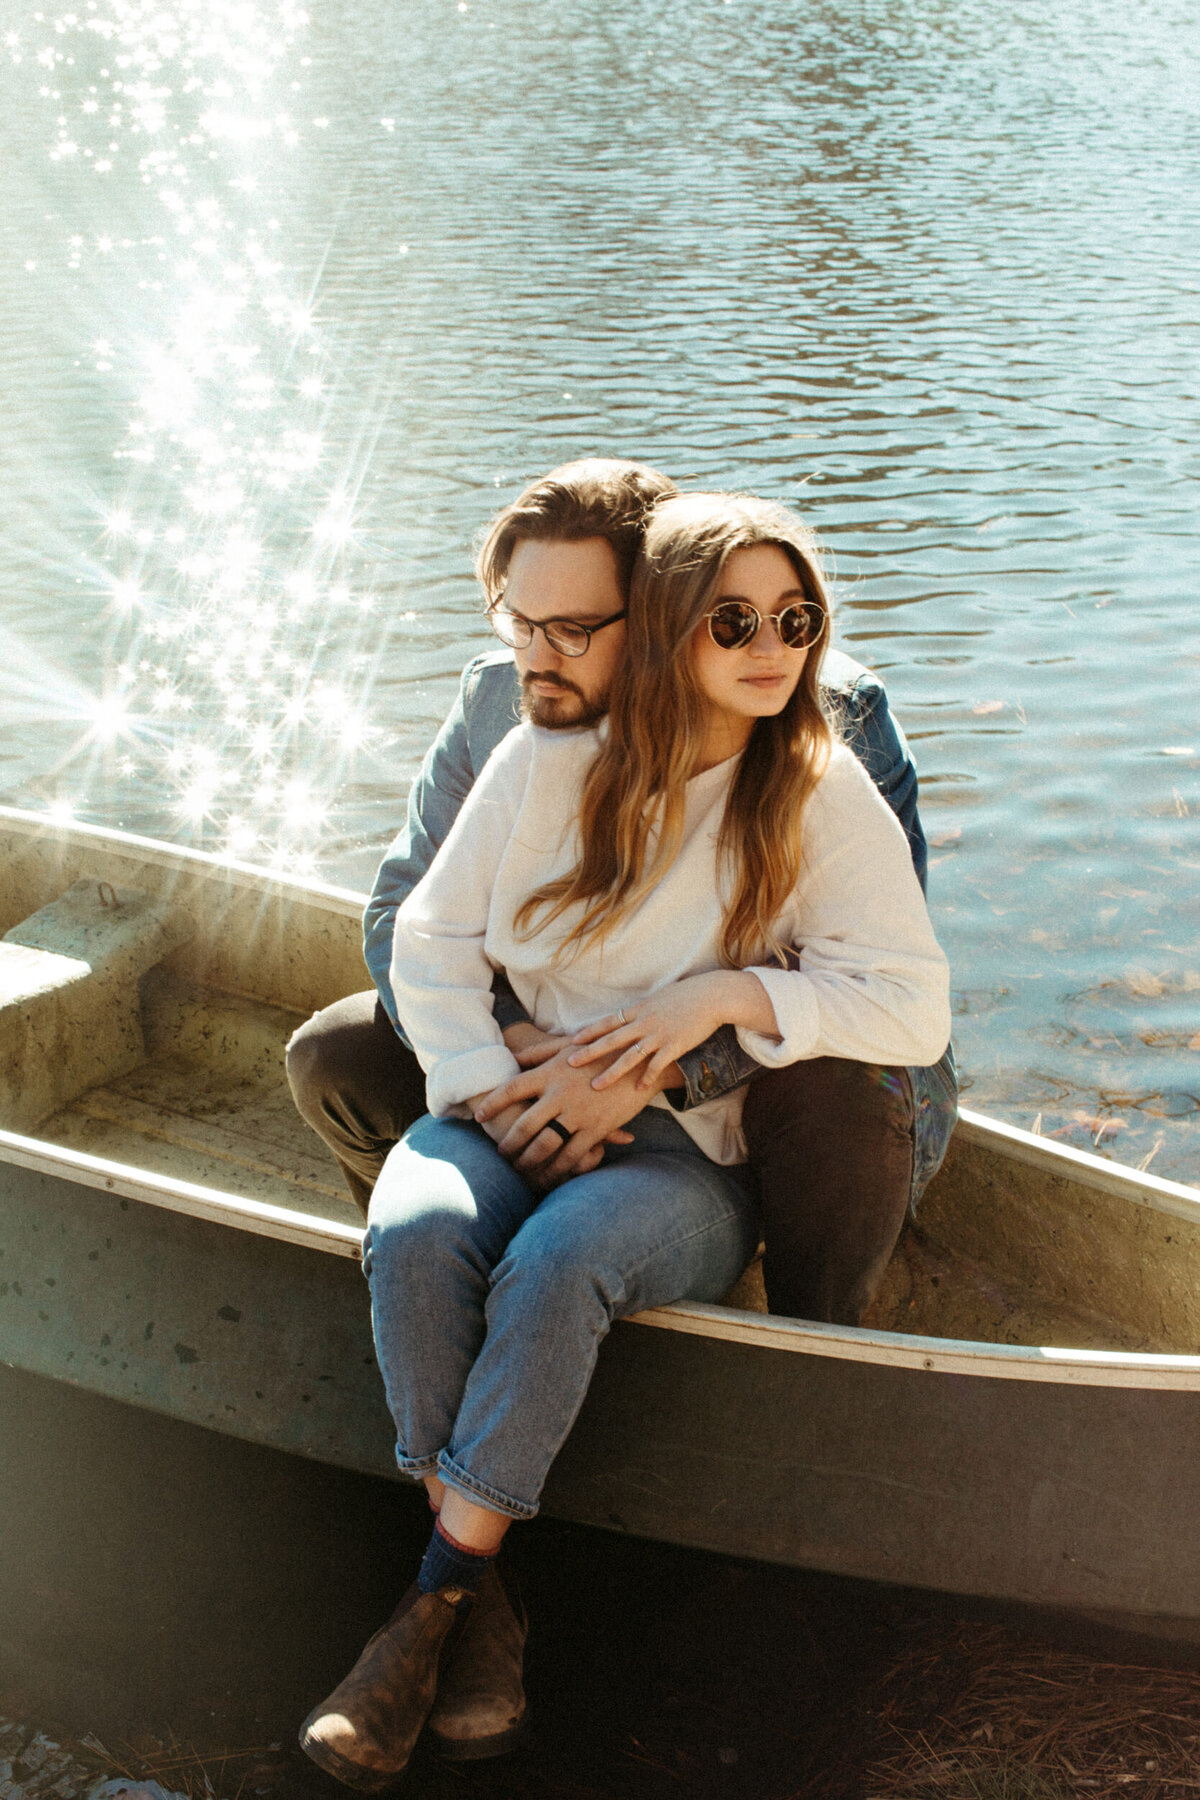 A guy is sitting in a canoe wrapping his arms around a girl with her legs hanging over the side of the boat as the sun reflects off the water behind them.